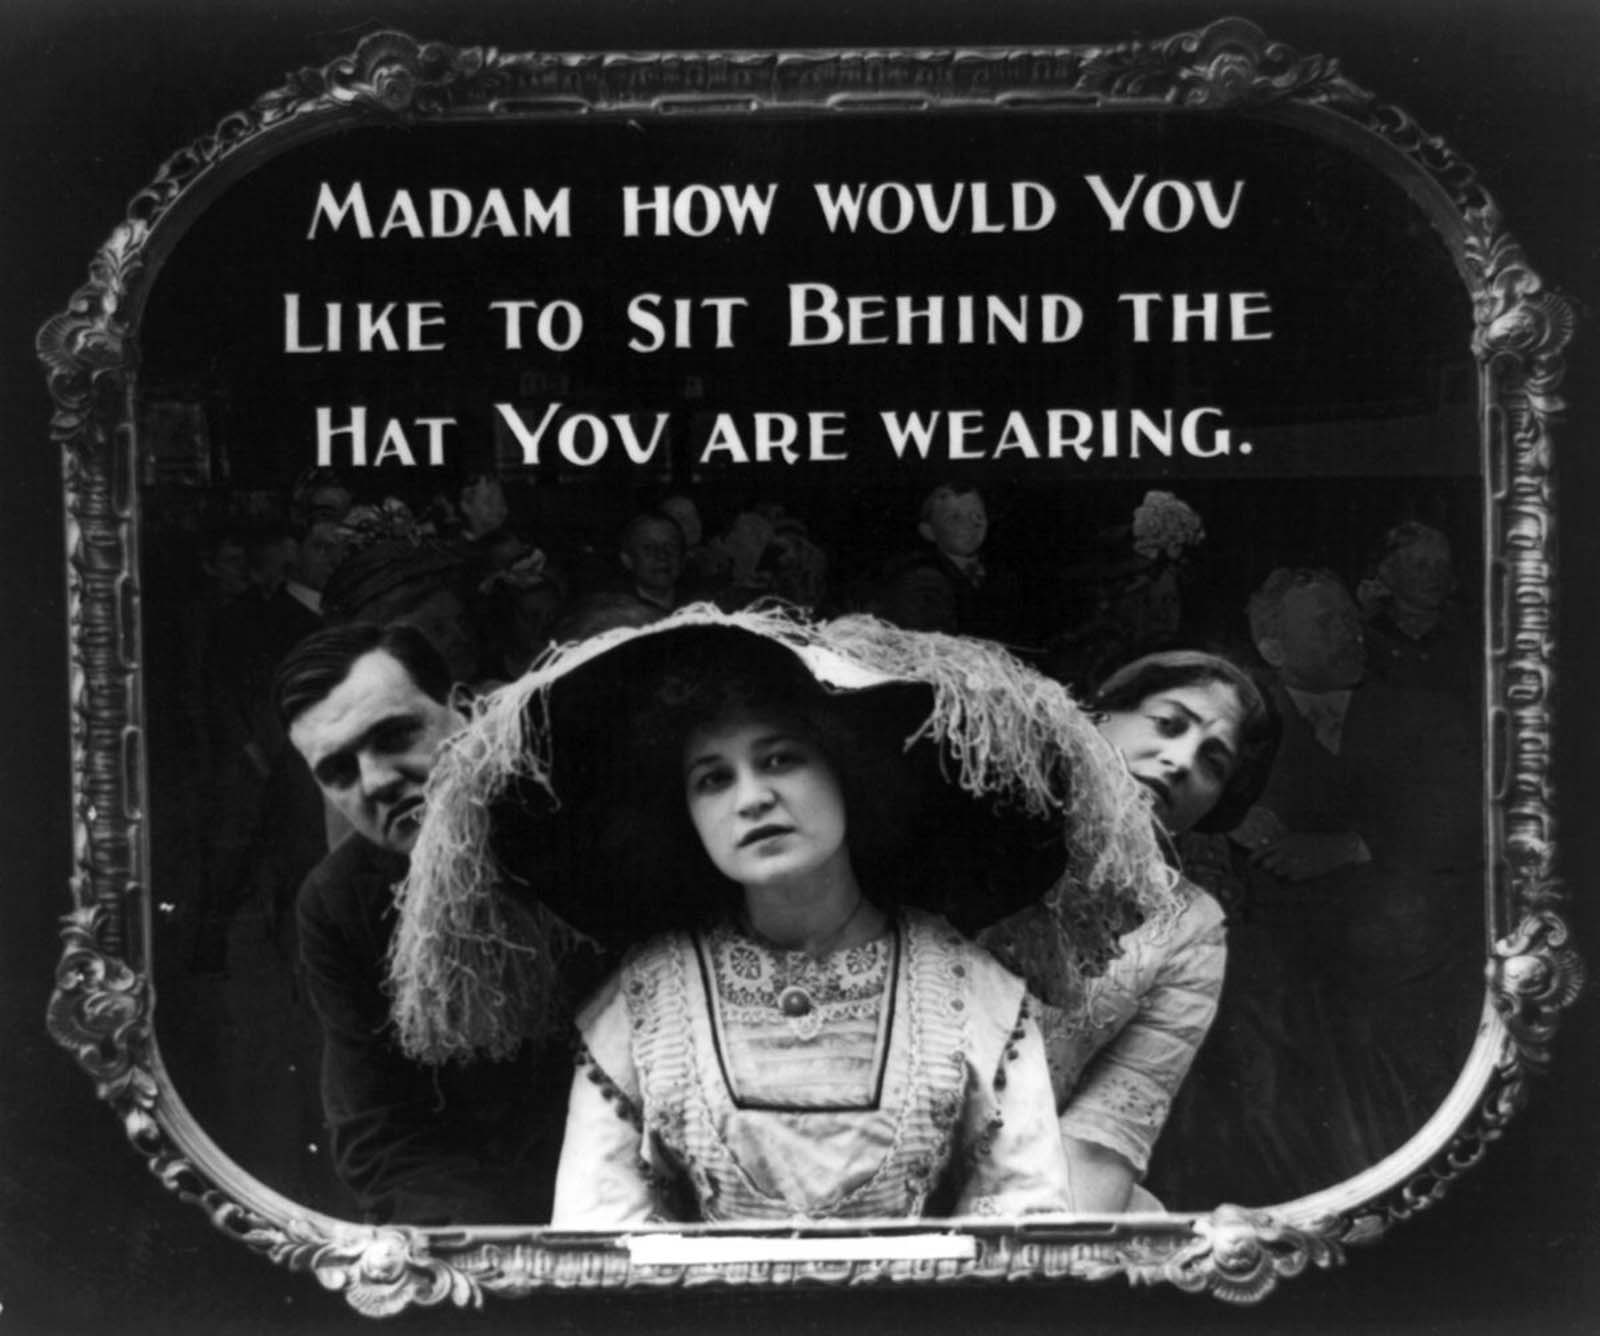 Bizarre Rules and etiquette from the 1910s that early Movie-goers had to follow